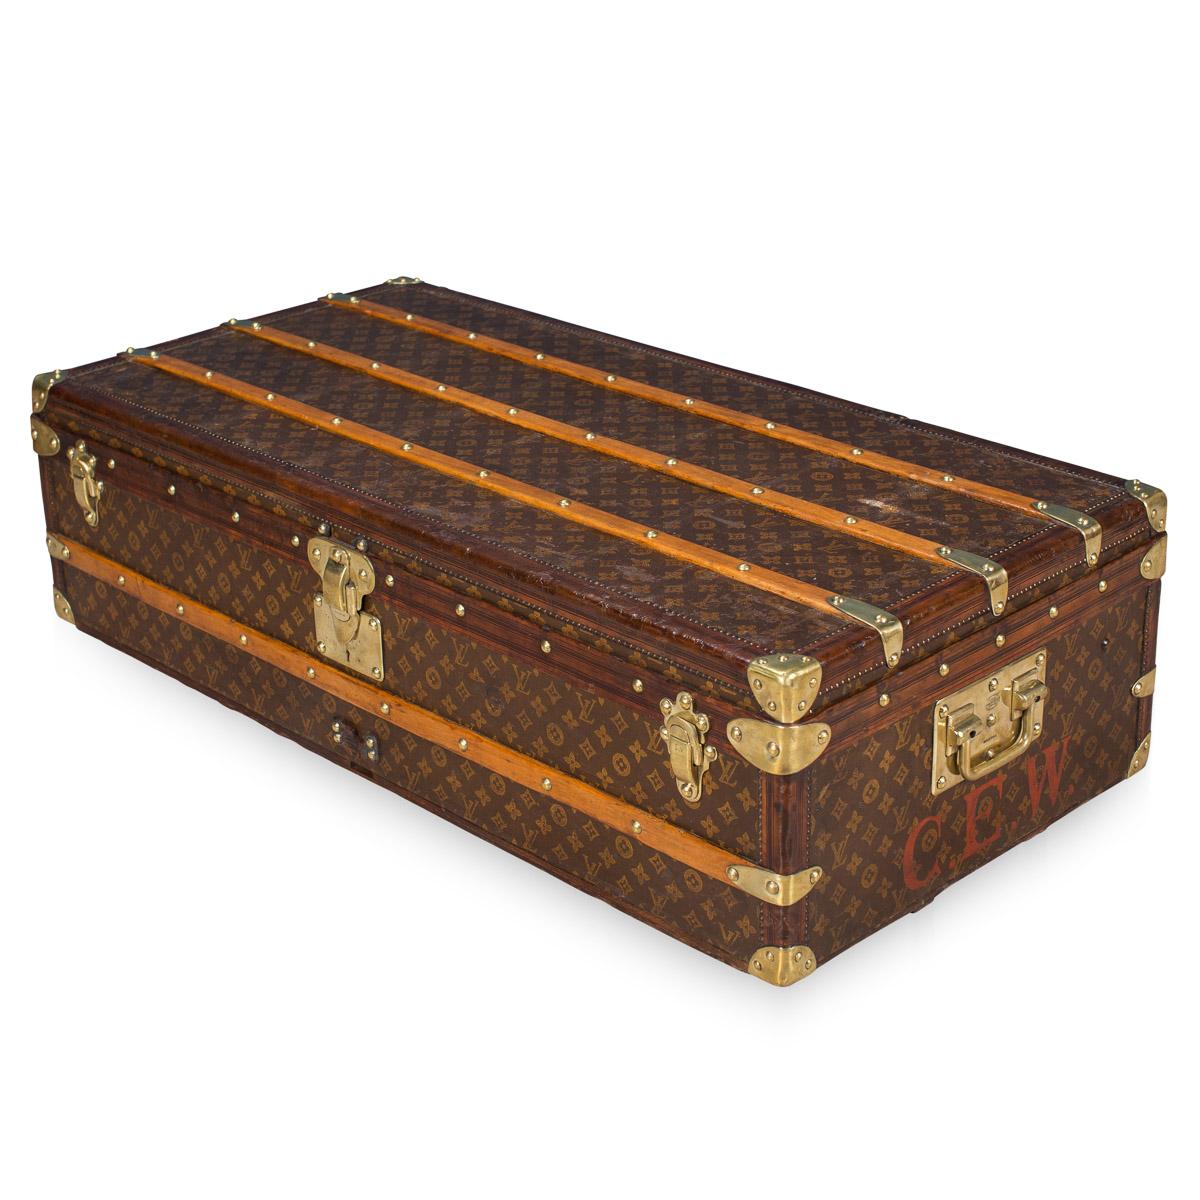 Beautiful early 20th century Louis Vuitton trunk covered in the world famous LV monogrammed canvas, with its lozine borders and brass fitting this trunk would have been the top of the line even at the time of purchase some 100 years ago. Oozing